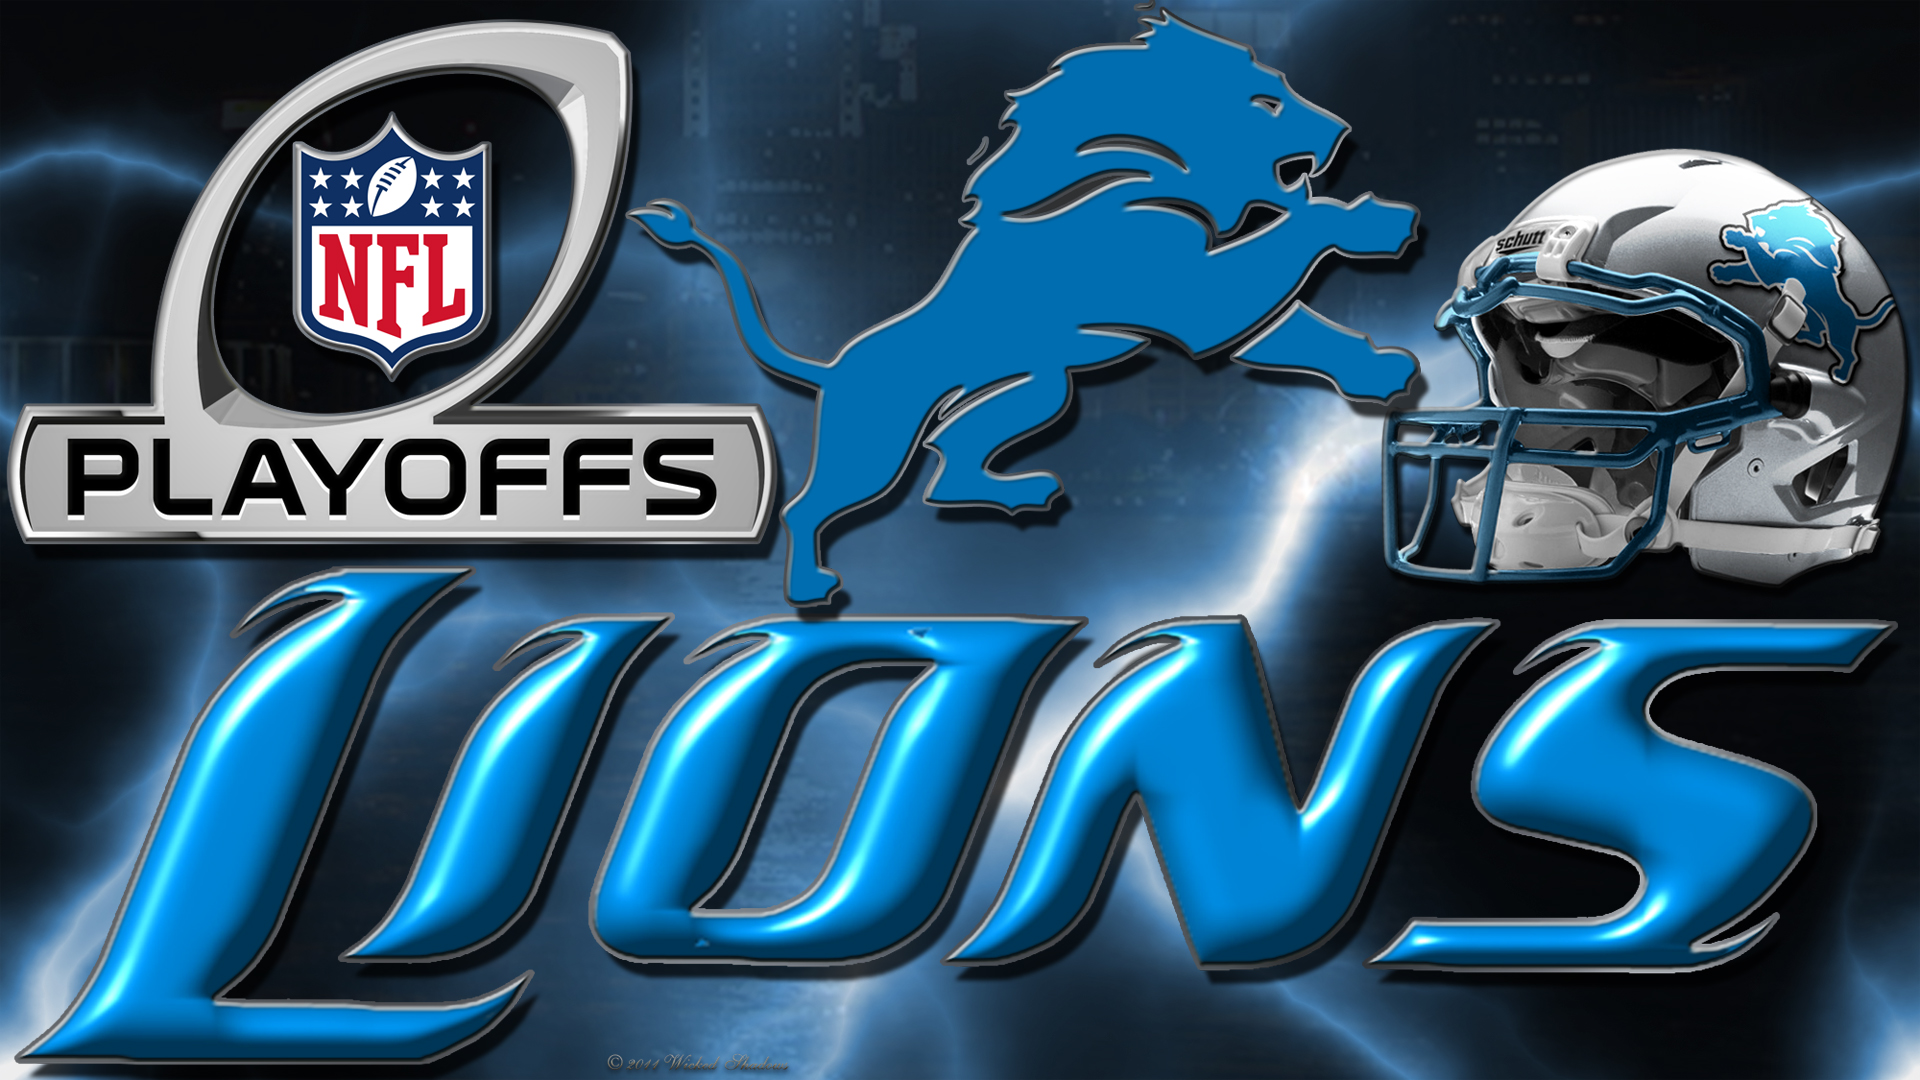 Wallpapers By Wicked Shadows Detroit Lions 2012 Playoffs Wallpaper